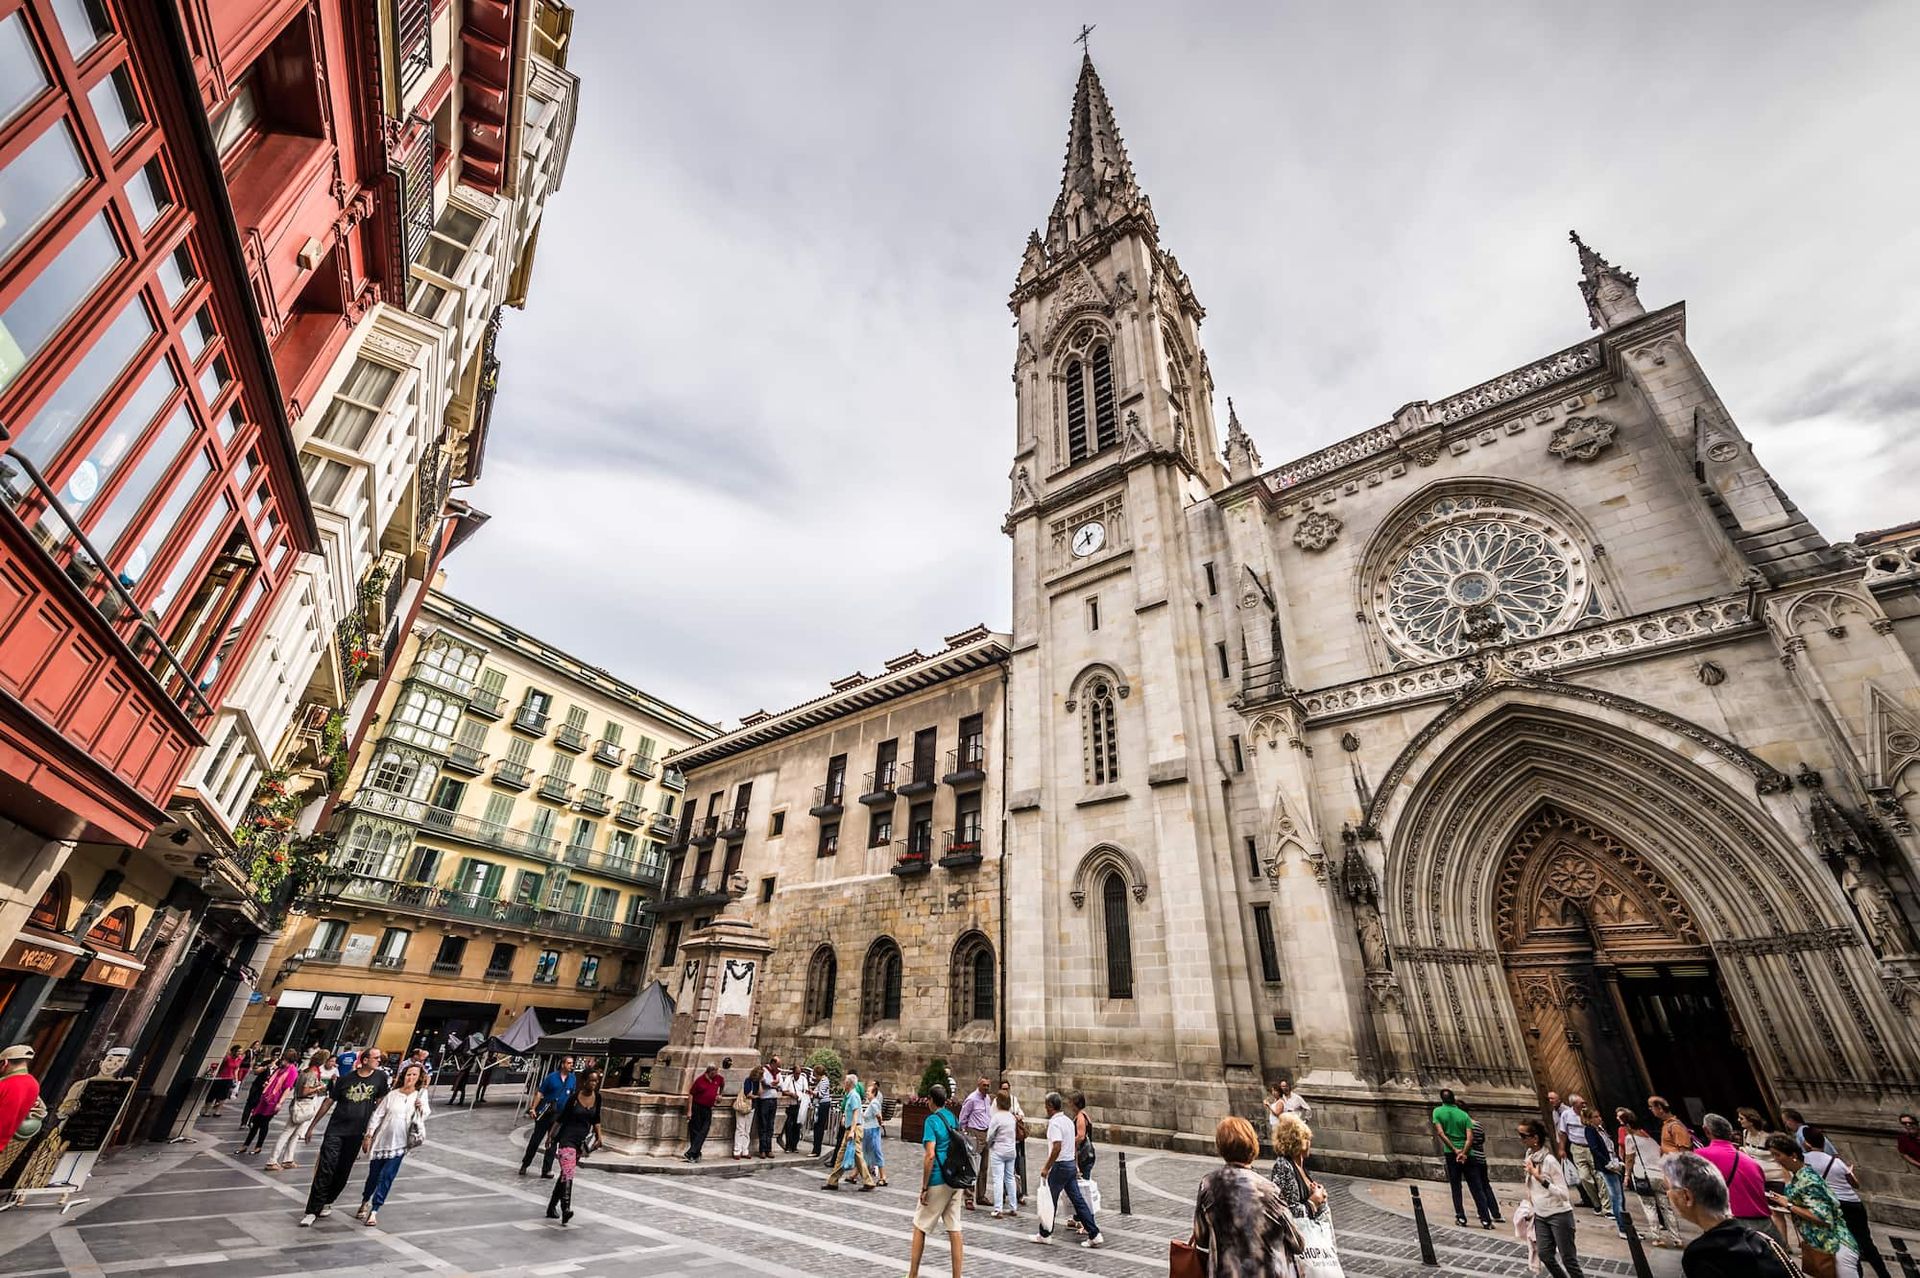 Five walks through Bilbao to discover all corners of the city